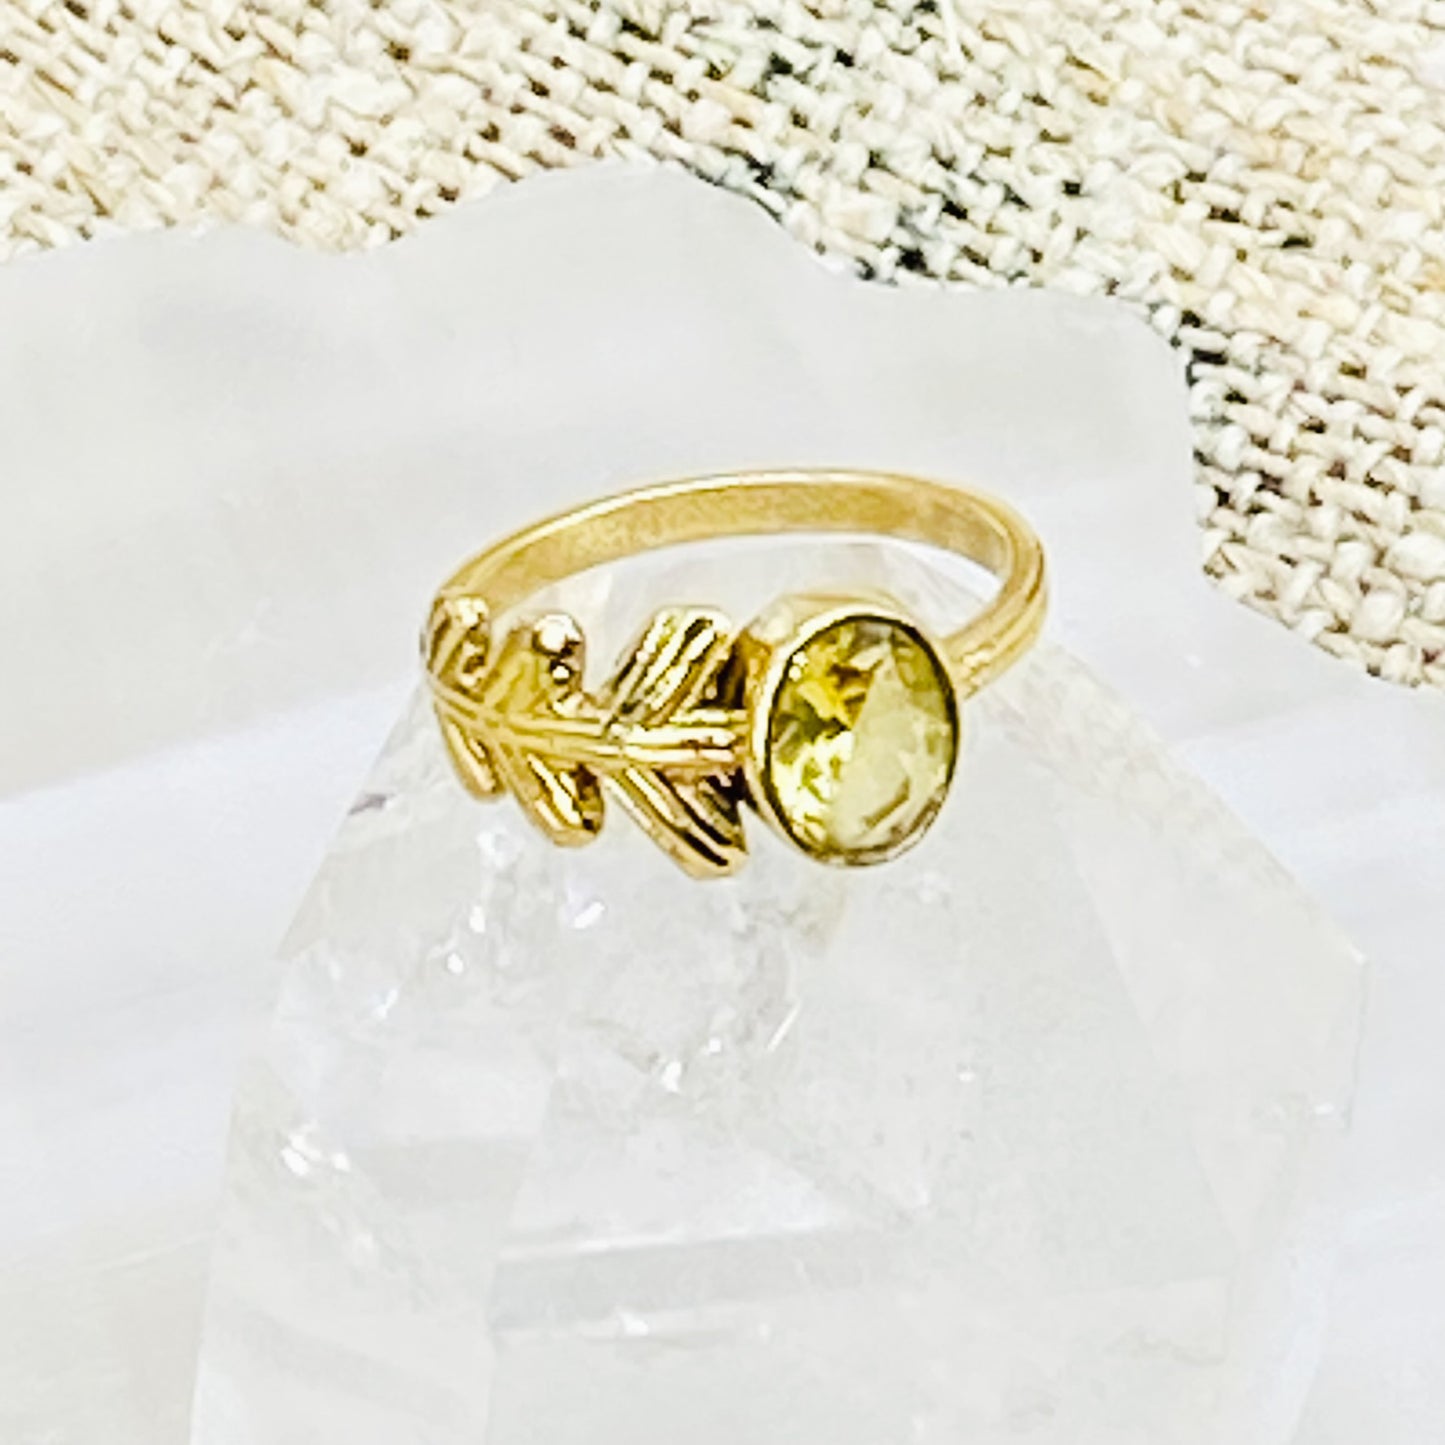 Gold Filled Crystal Ring, Handmade Jewelry, Leaf Style Ring, Bohemian Jewelry, Gift For Her, Non Tarnish Ring,Statement Ring, Stackable Ring